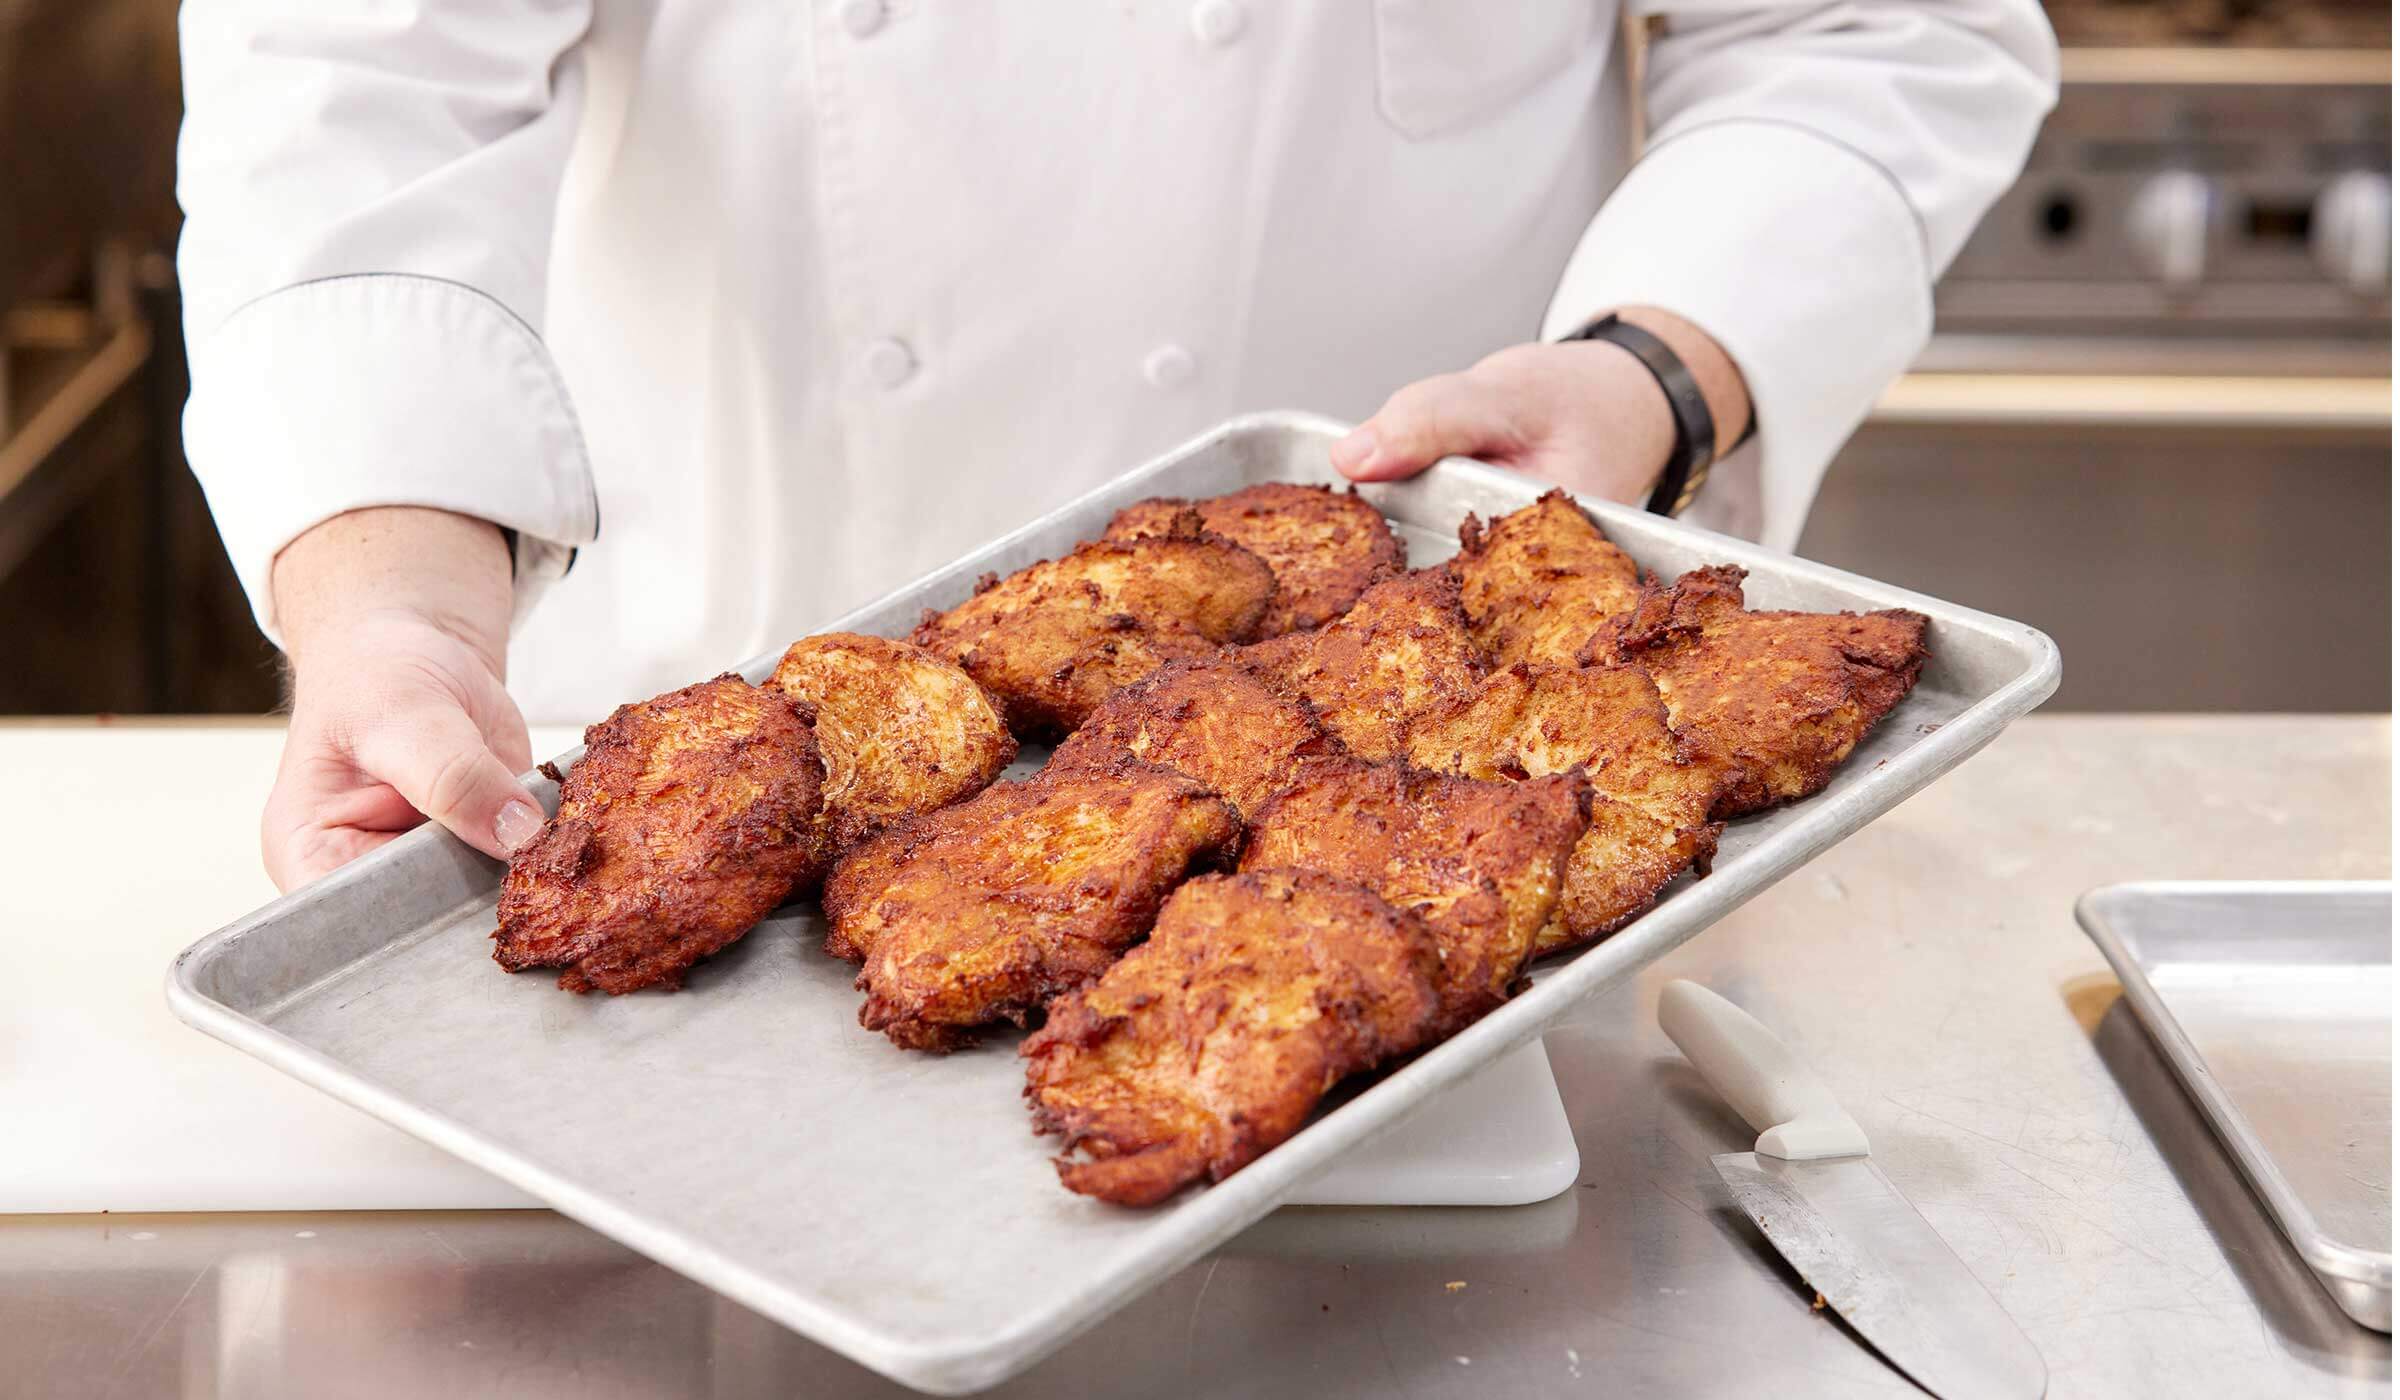 Redefining value: FLASH 180™ Battered Sous Vide Chicken. This product provides foodservice operators an easy-to-prepare chicken option that helps increase productivity and profitability without compromising on flavor, all in approximately three minutes.